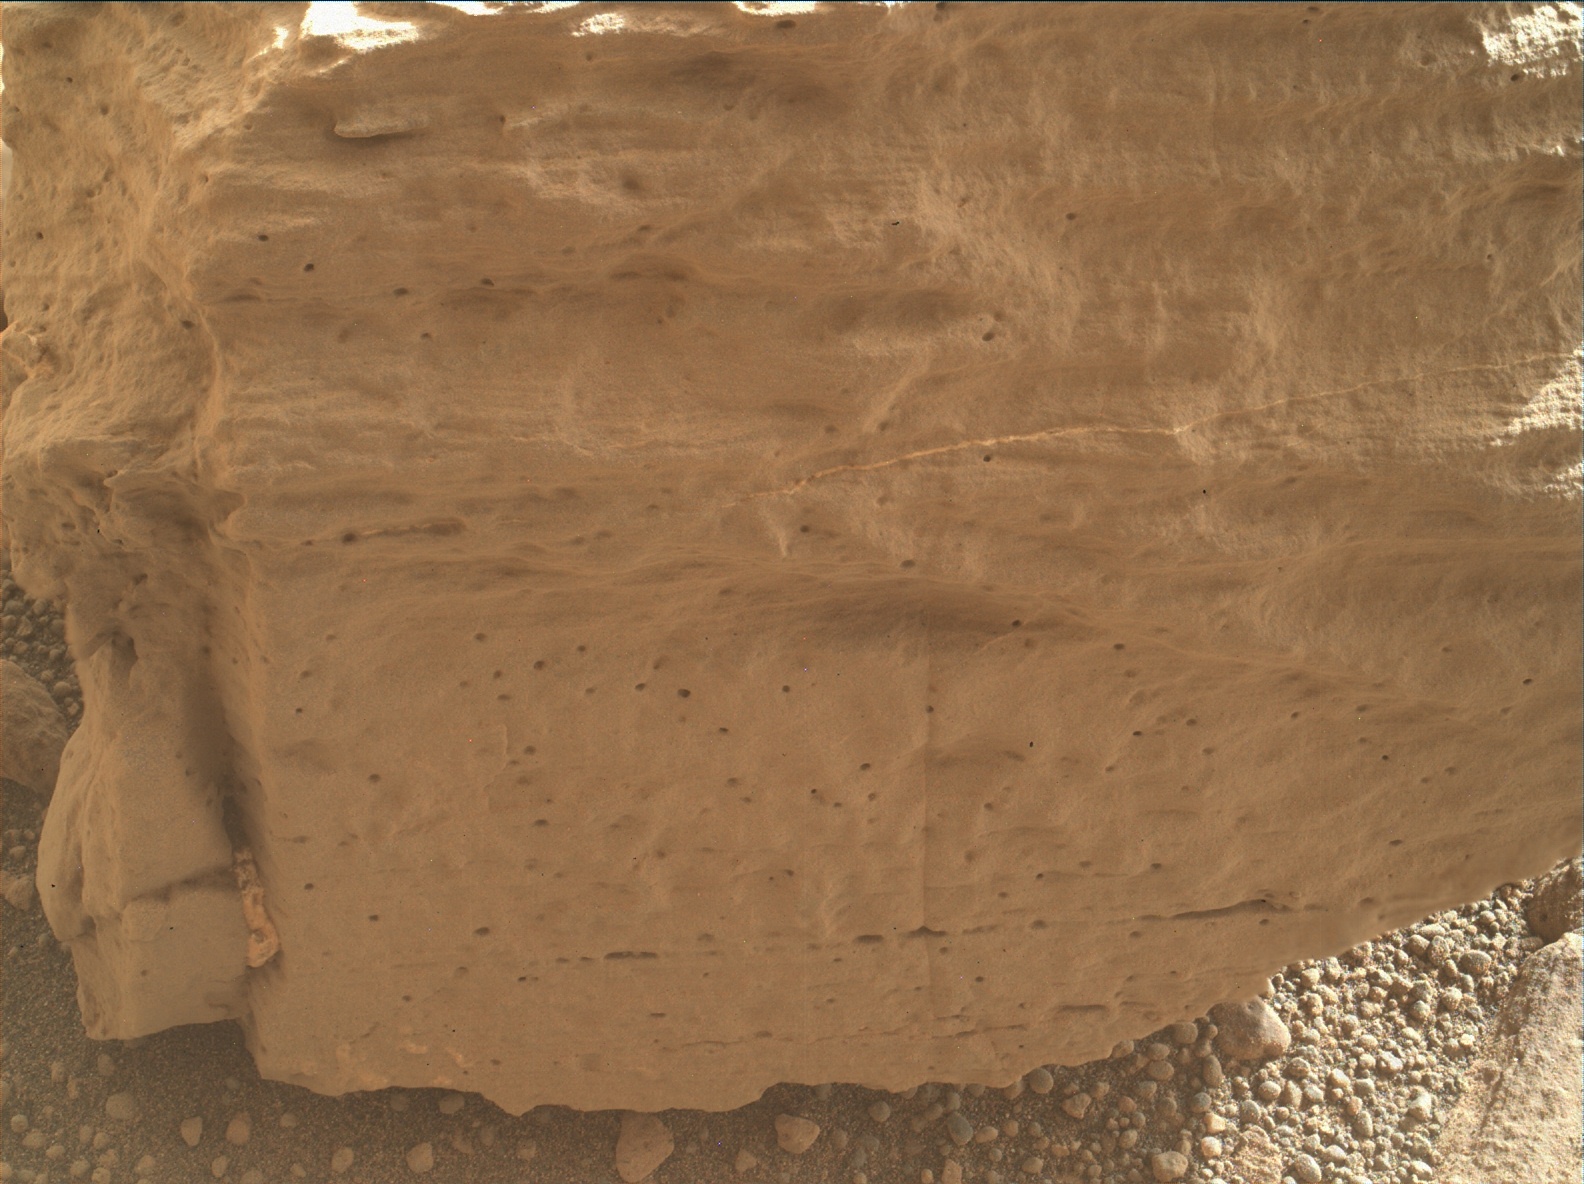 Nasa's Mars rover Curiosity acquired this image using its Mars Hand Lens Imager (MAHLI) on Sol 1438